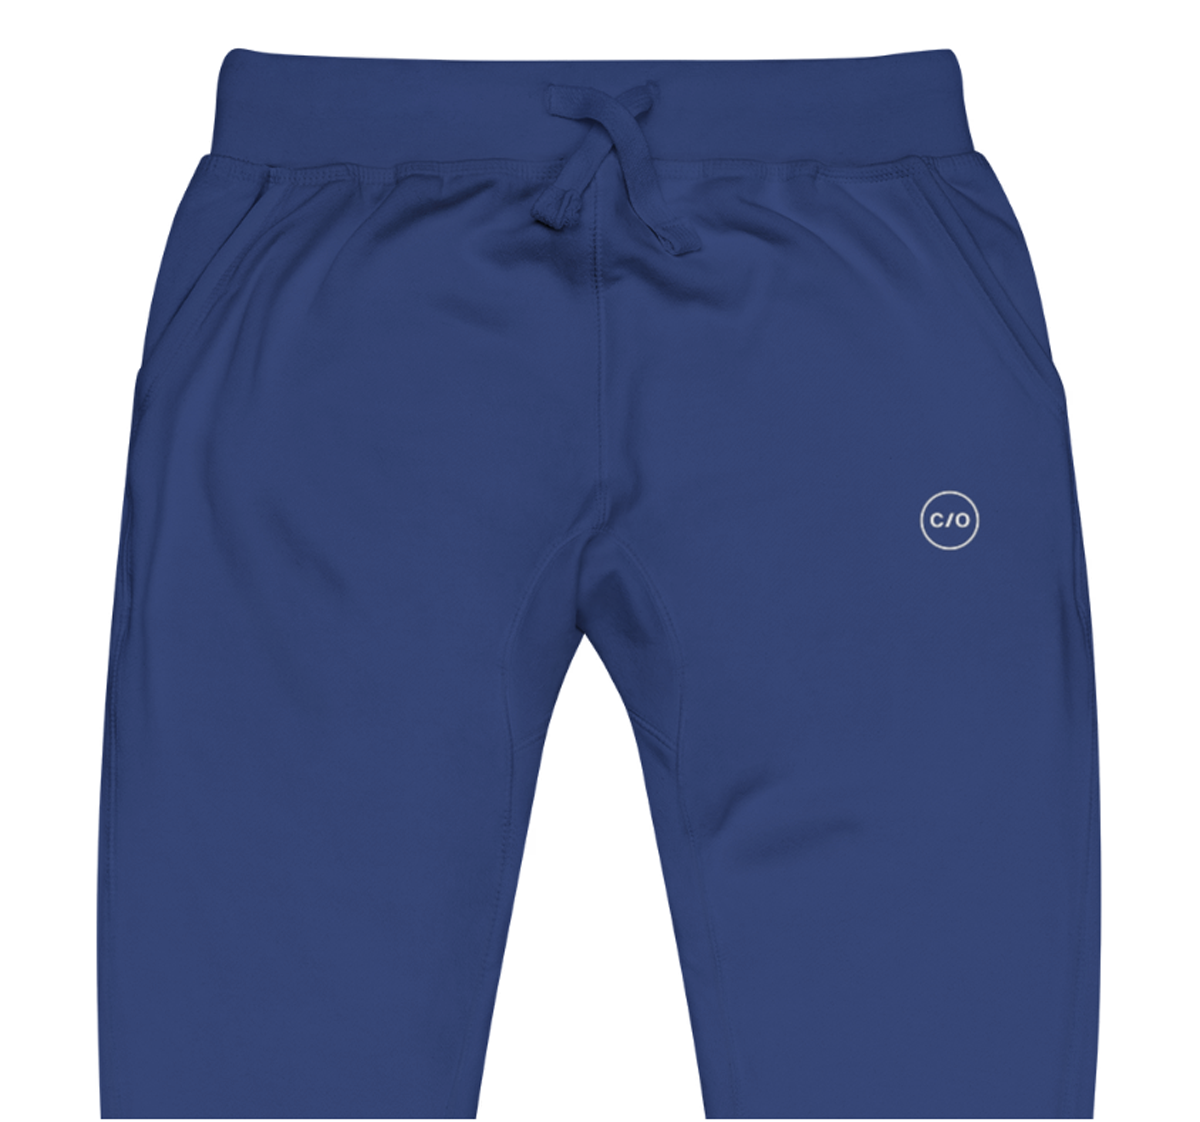 Neue Supply Co. Women's Performance Jogger in Blue